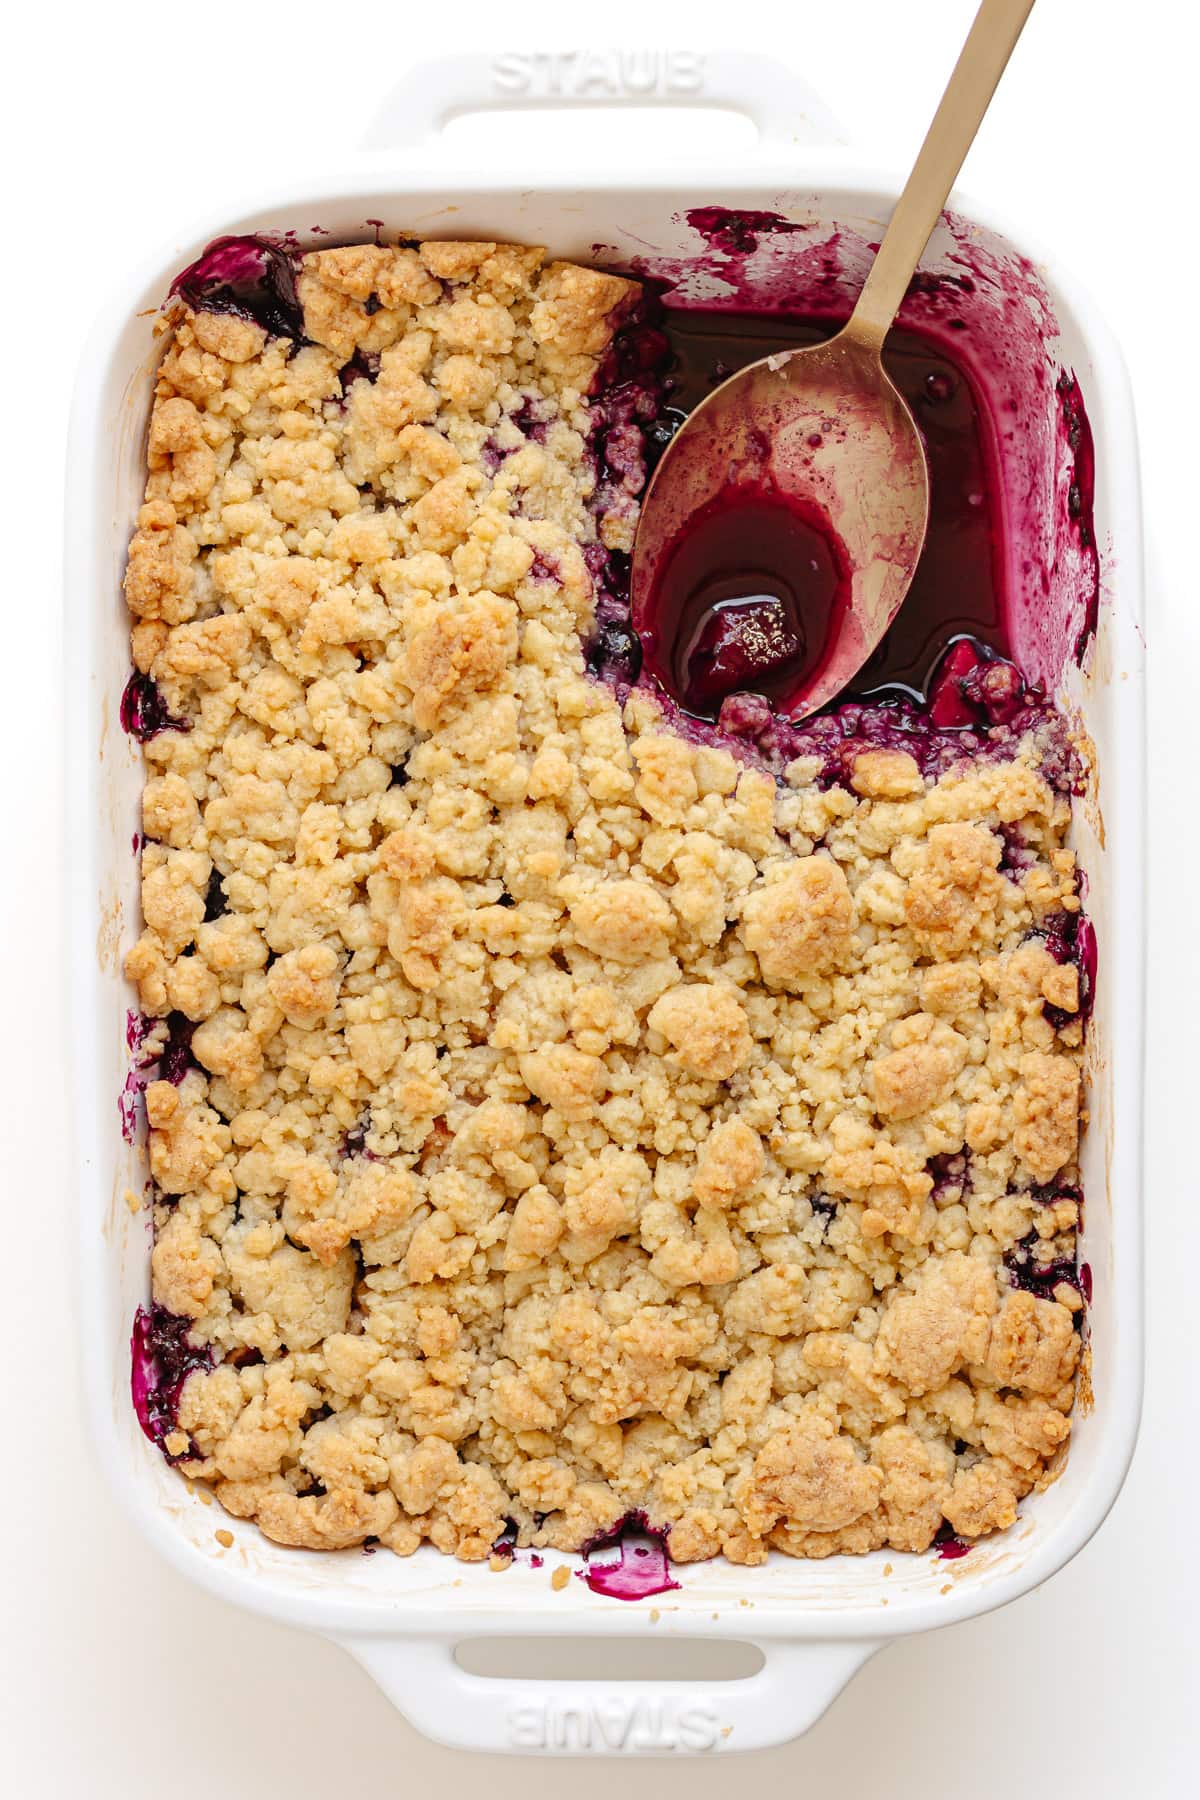 White baking dish of blueberry and apple crumble with a section scooped out of the top right corner.